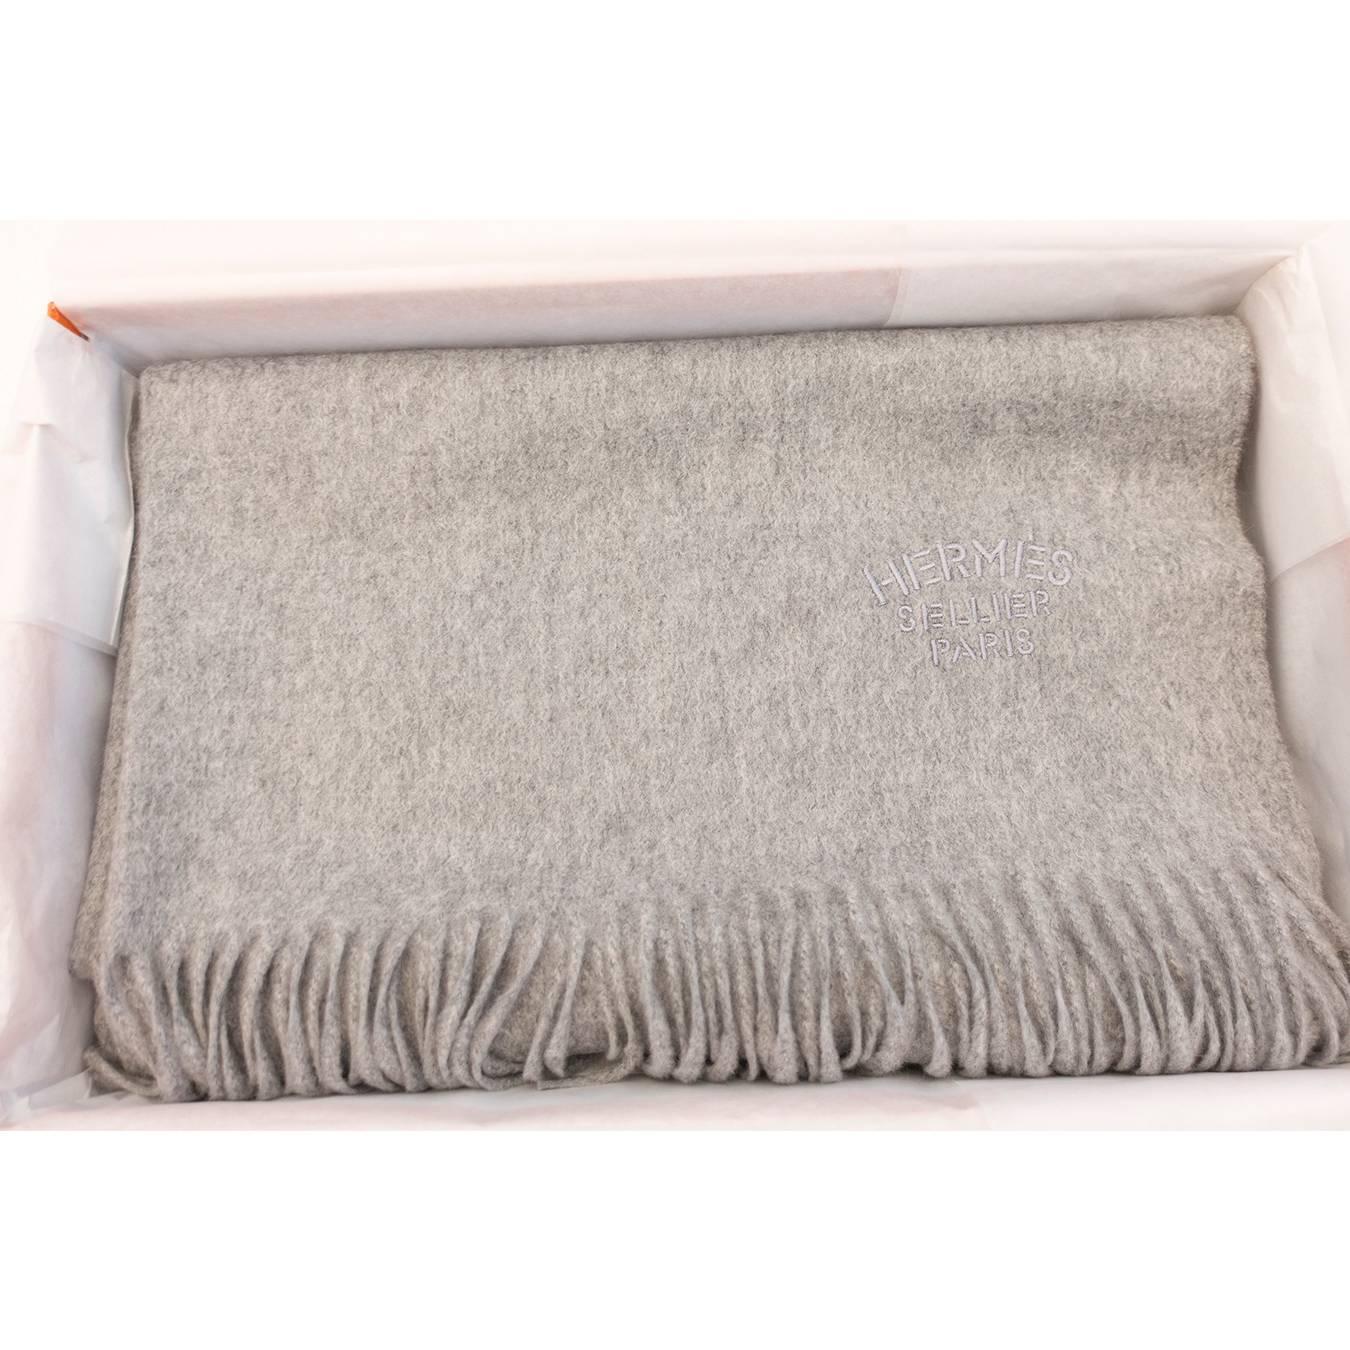 Store fresh. Pristine condition. 
Perfect gift! Comes full set with Hermes box and ribbon. 
Below retail of $1171 including tax where we are. 
Luxuriously soft 100% cashmere scarf / stole is brand new for fall winter 2015 Double faced cashmere